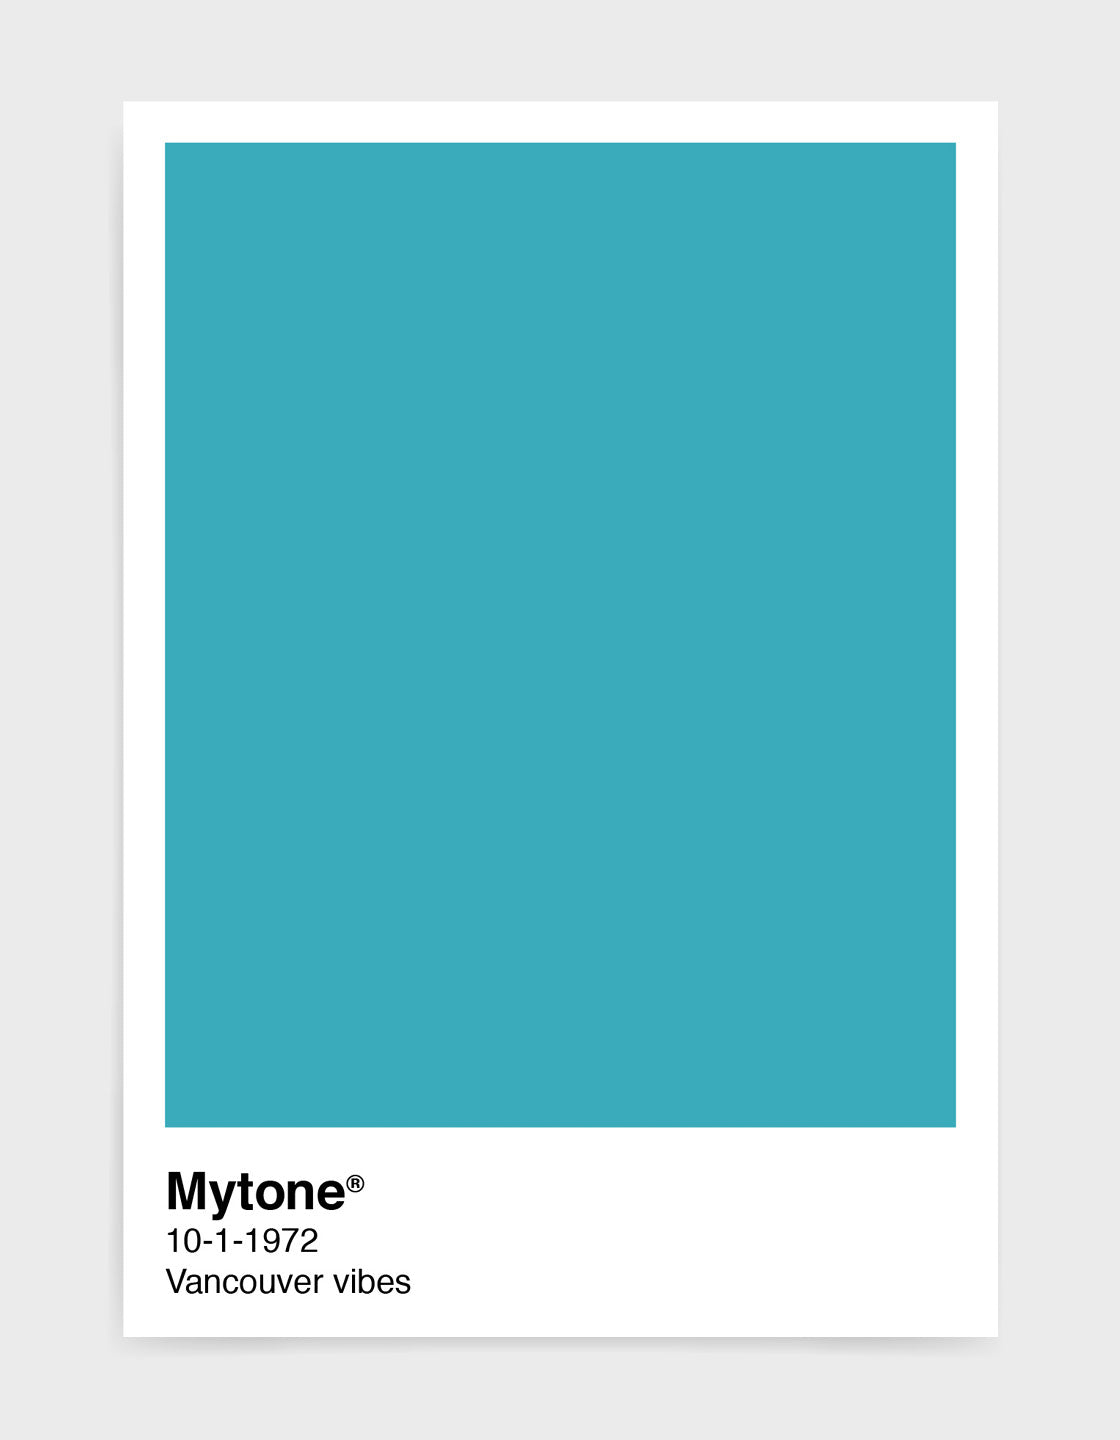 Pantone style art print with custom colour and text image shows turquoise print